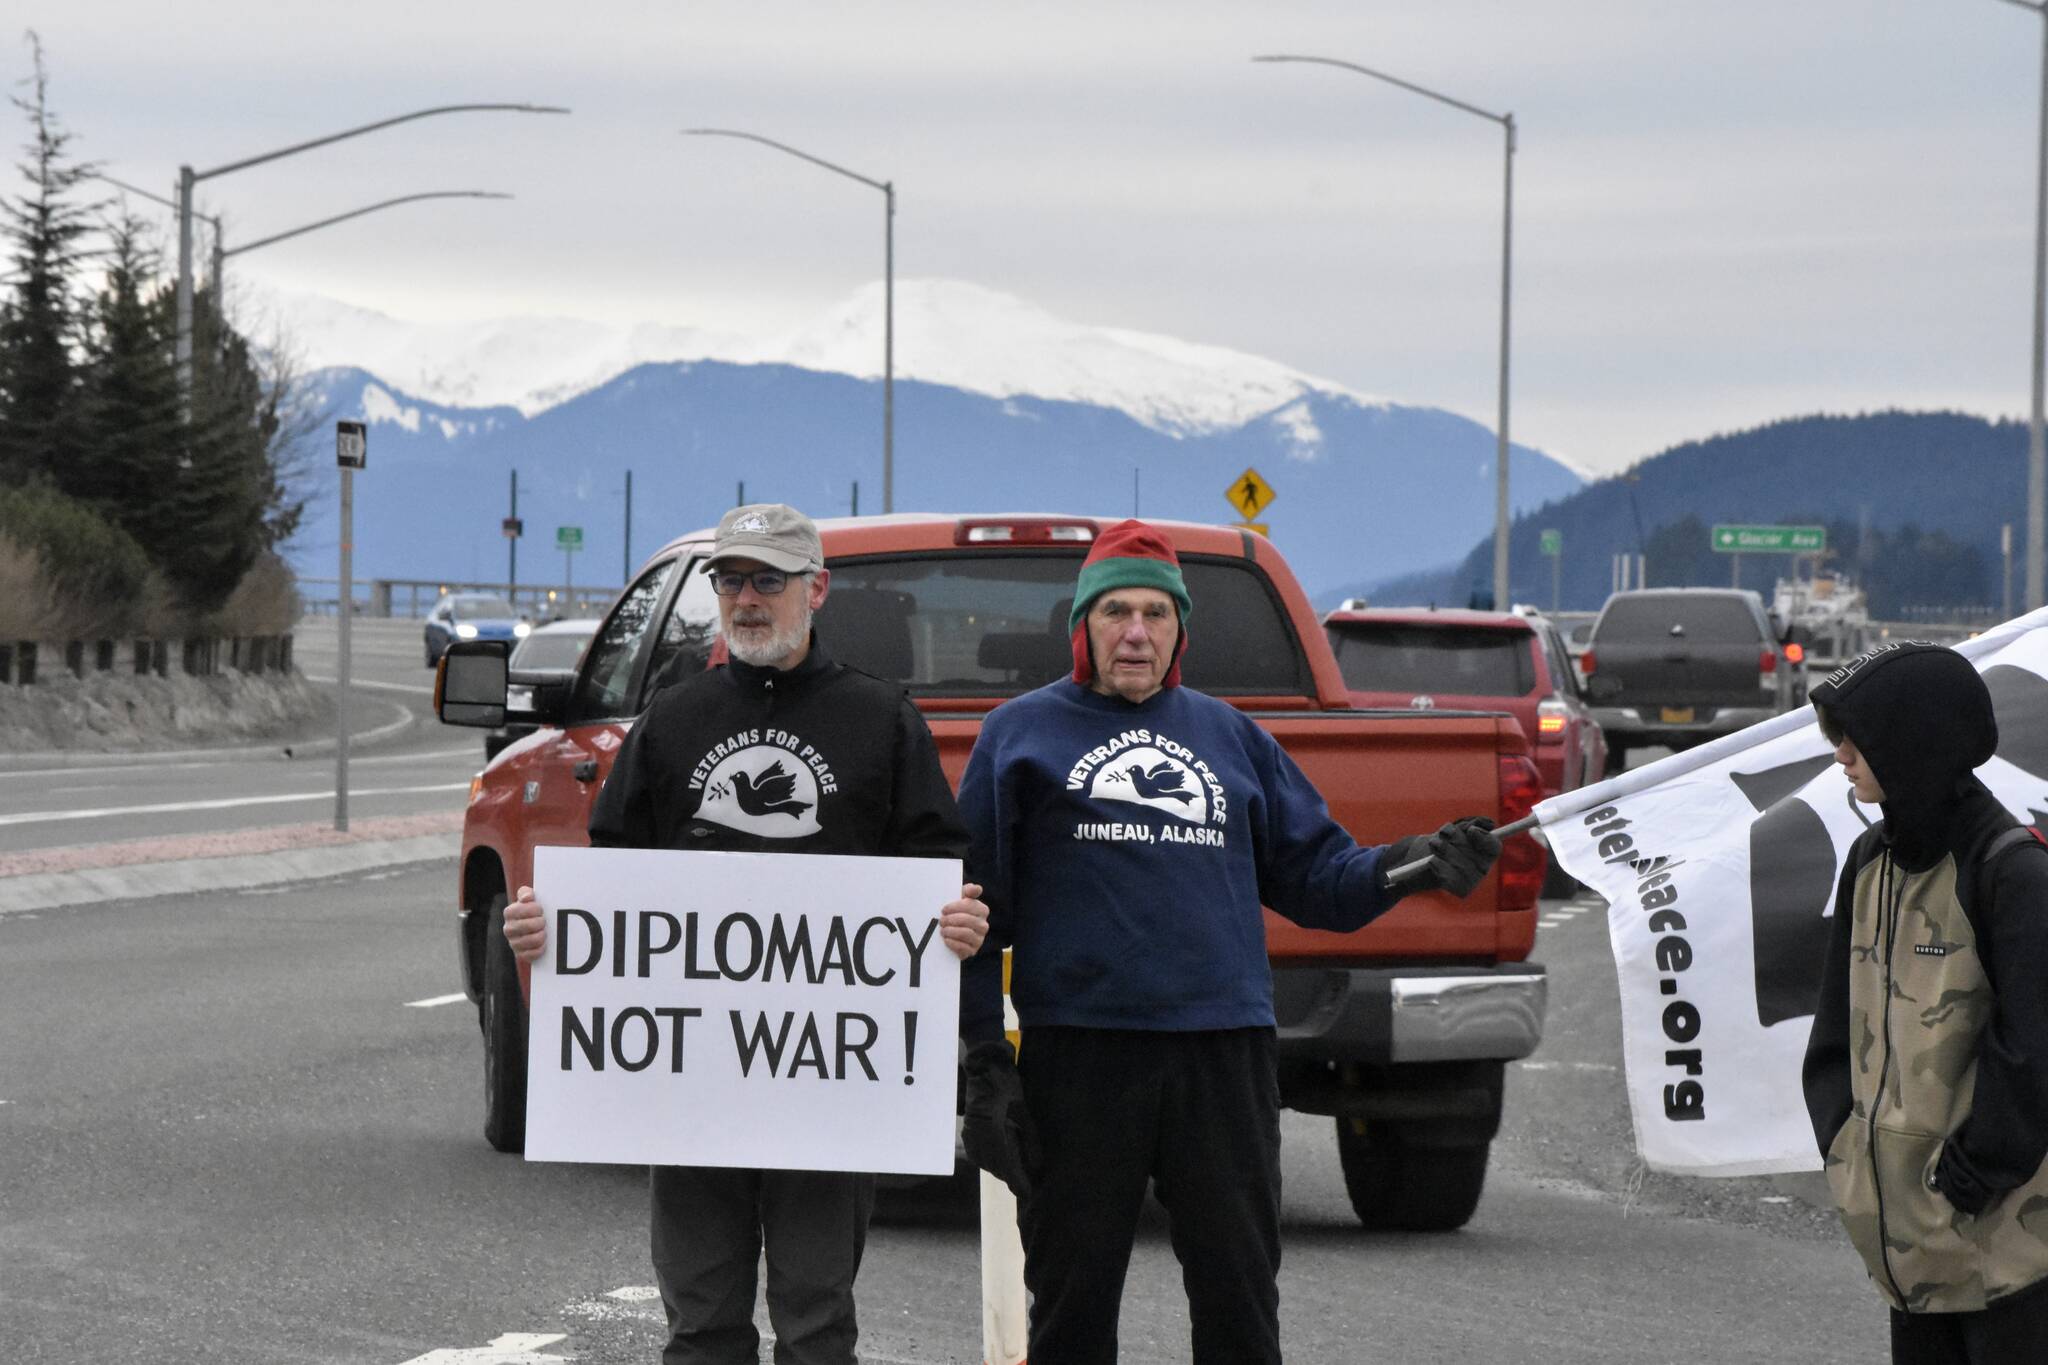 Juneau members of Veterans for Peace Craig Wilson, left, and K.J. Metcalf, wave signs urging a diplomatic solution in Ukraine the morning of Tuesday, Feb. 22, 2022. (Peter Segall / Juneau Empire)